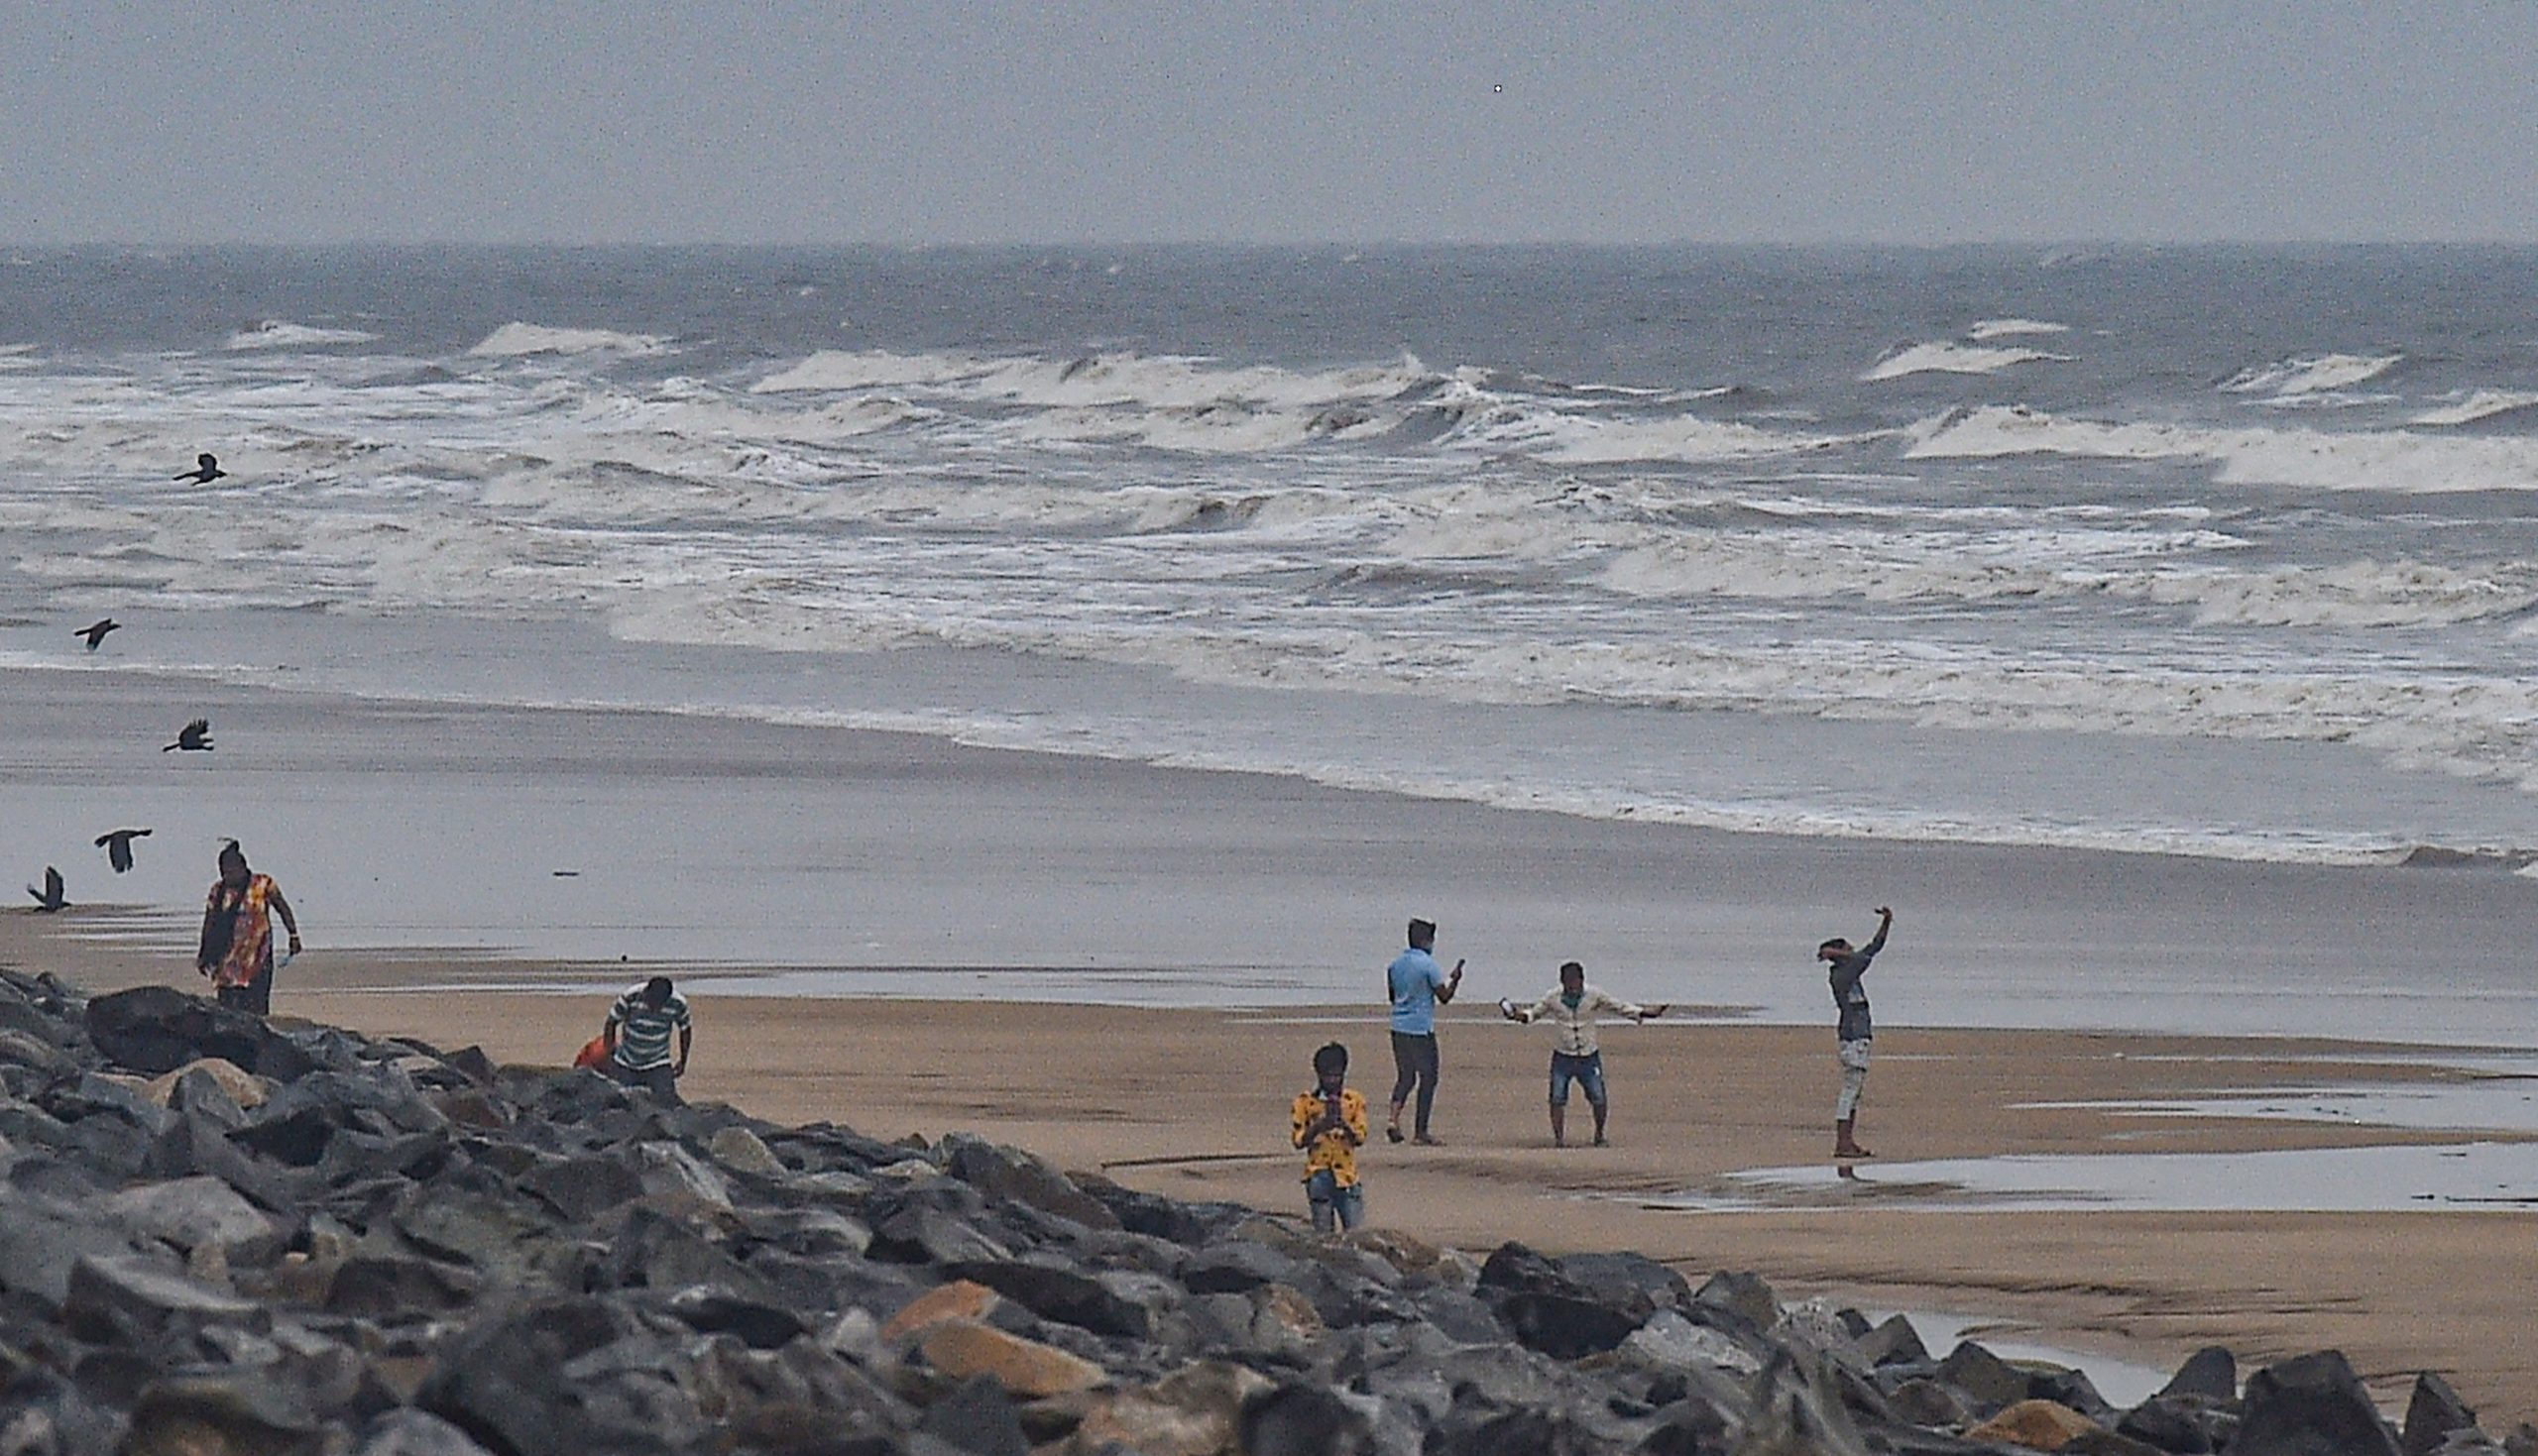 Frequency of cyclones in Arabian Sea risen by 52% from 1982-2019: Study